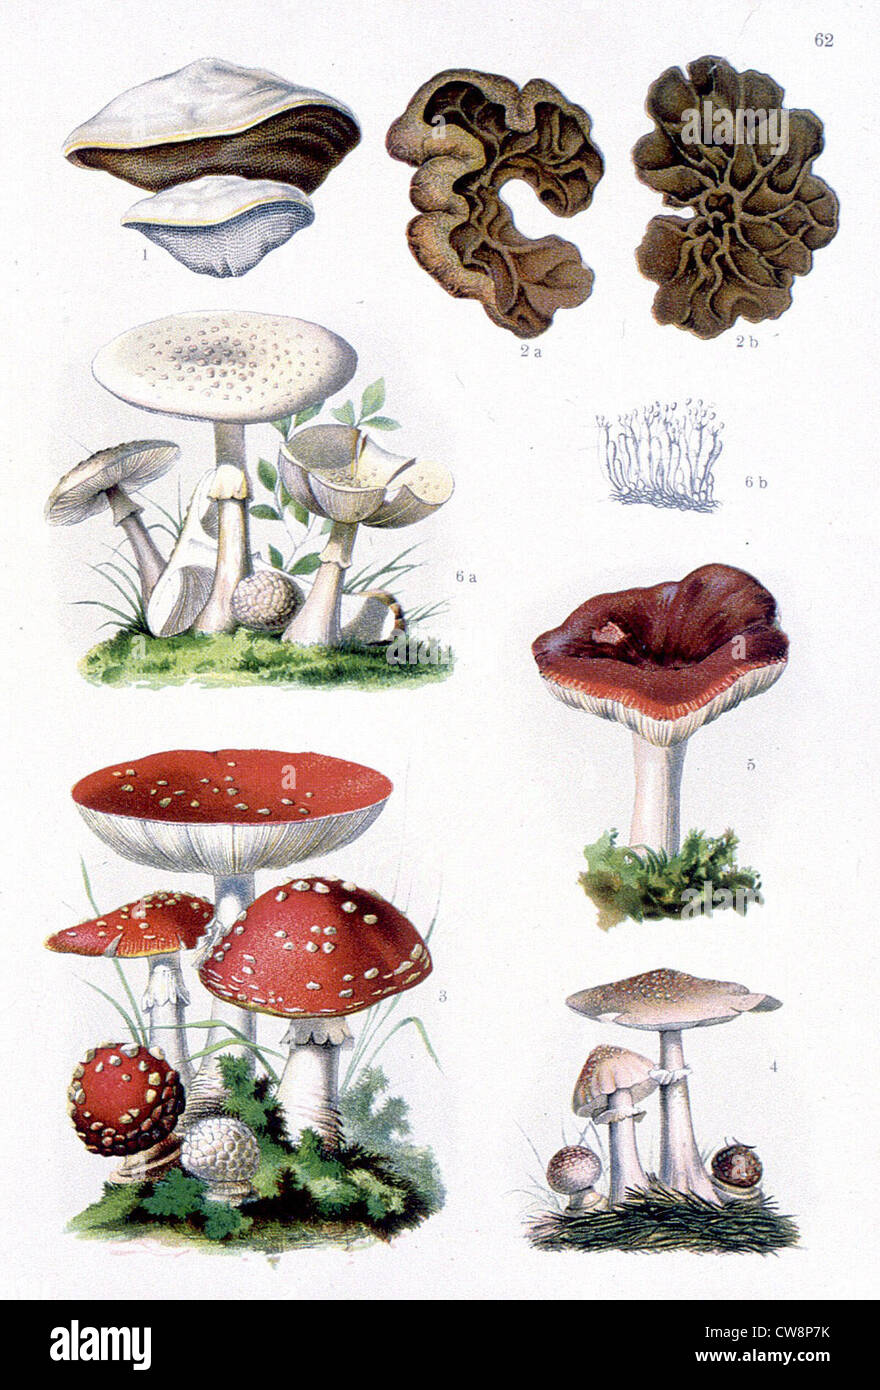 Poisonous medicinal plants, representations from the late 19th century Stock Photo